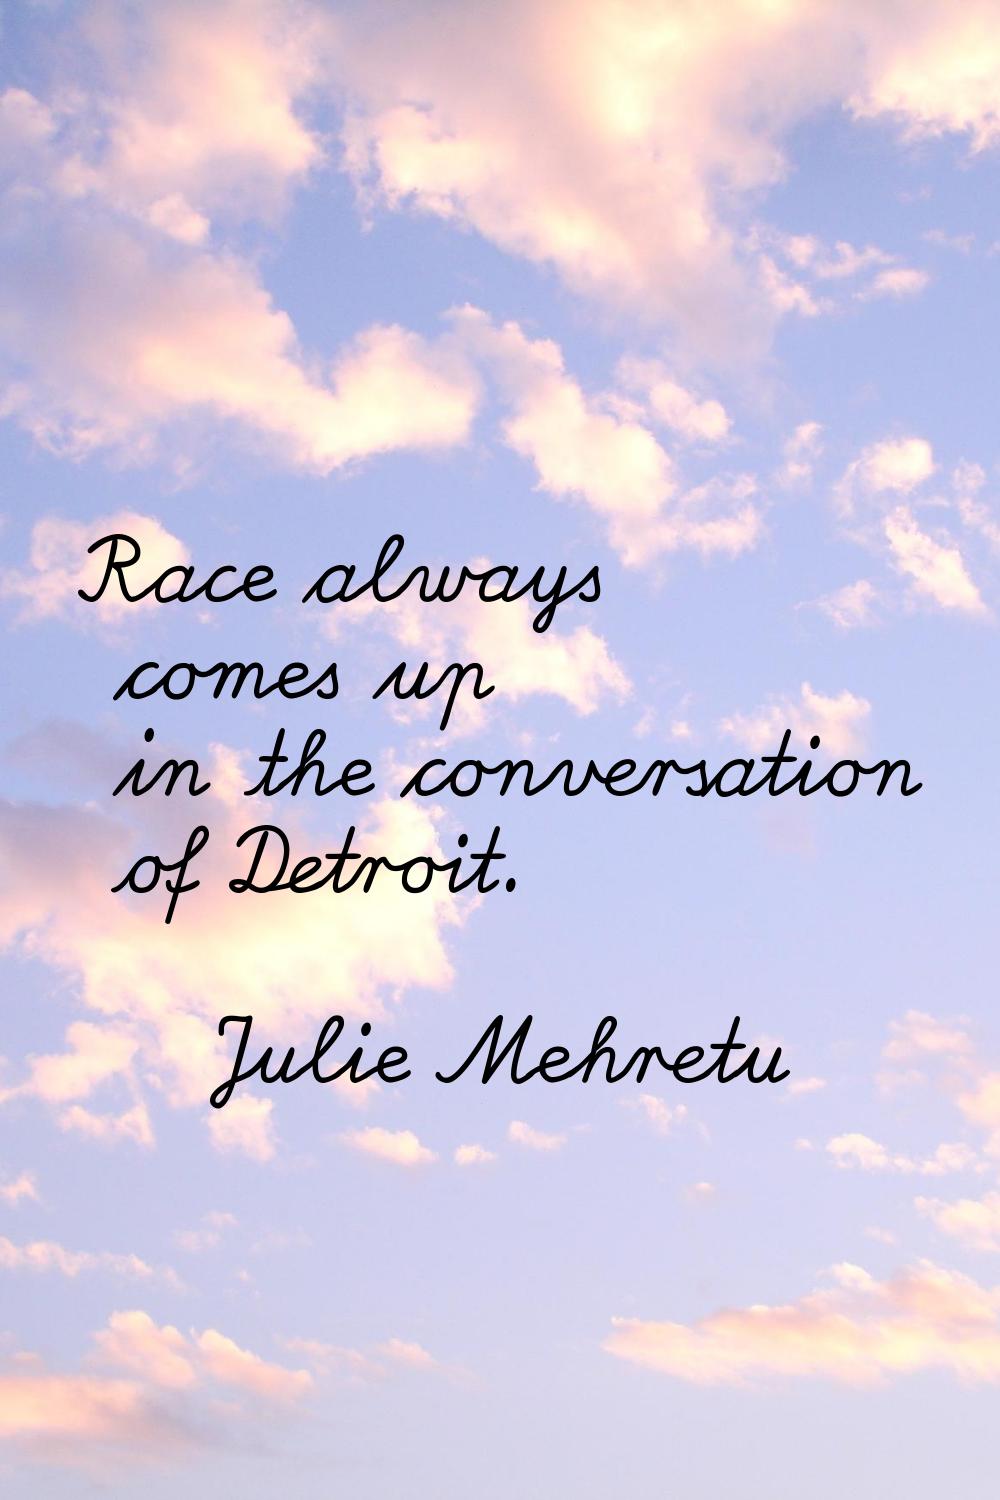 Race always comes up in the conversation of Detroit.